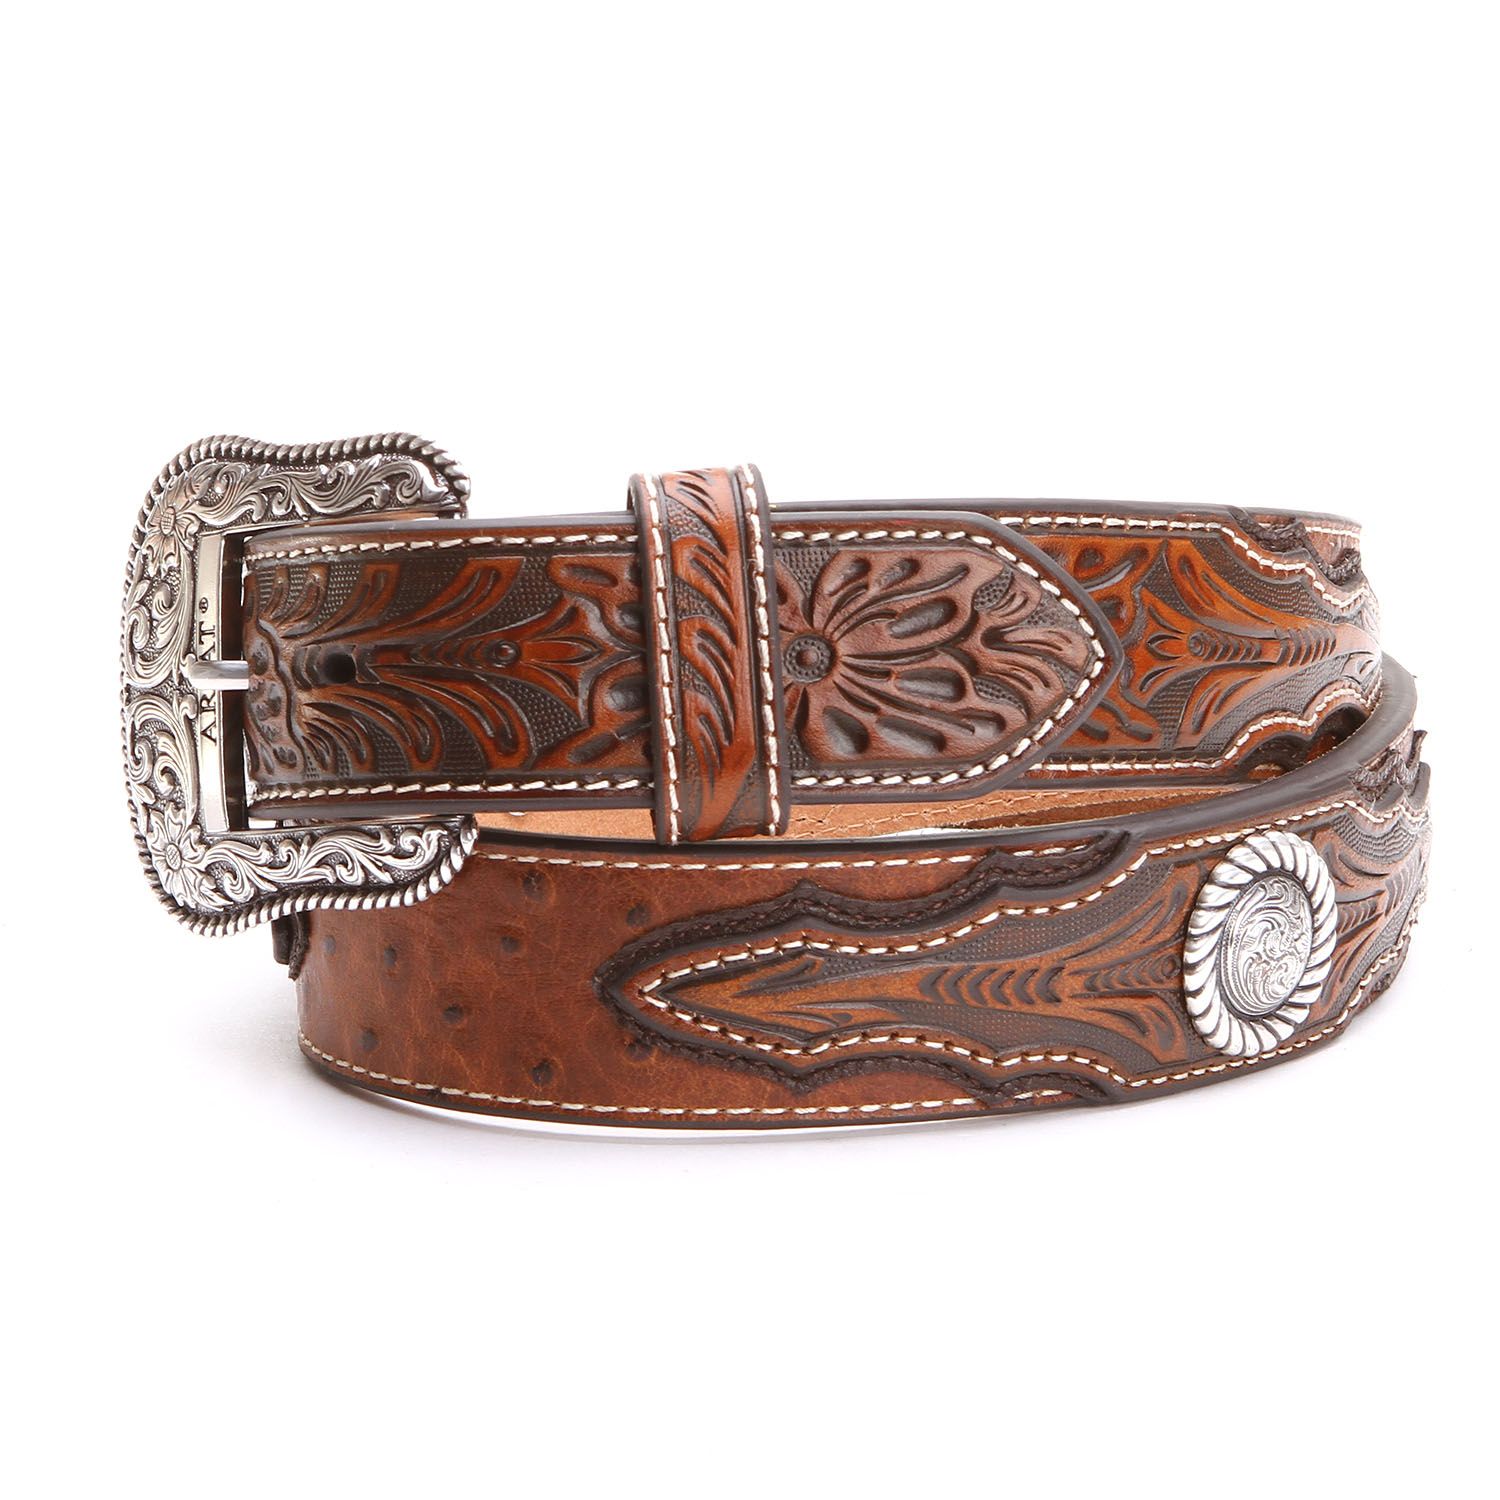 Canyon Outback Men's Brown Leather Belt Western Style NEW w/o Tag Sz 32 L 255 